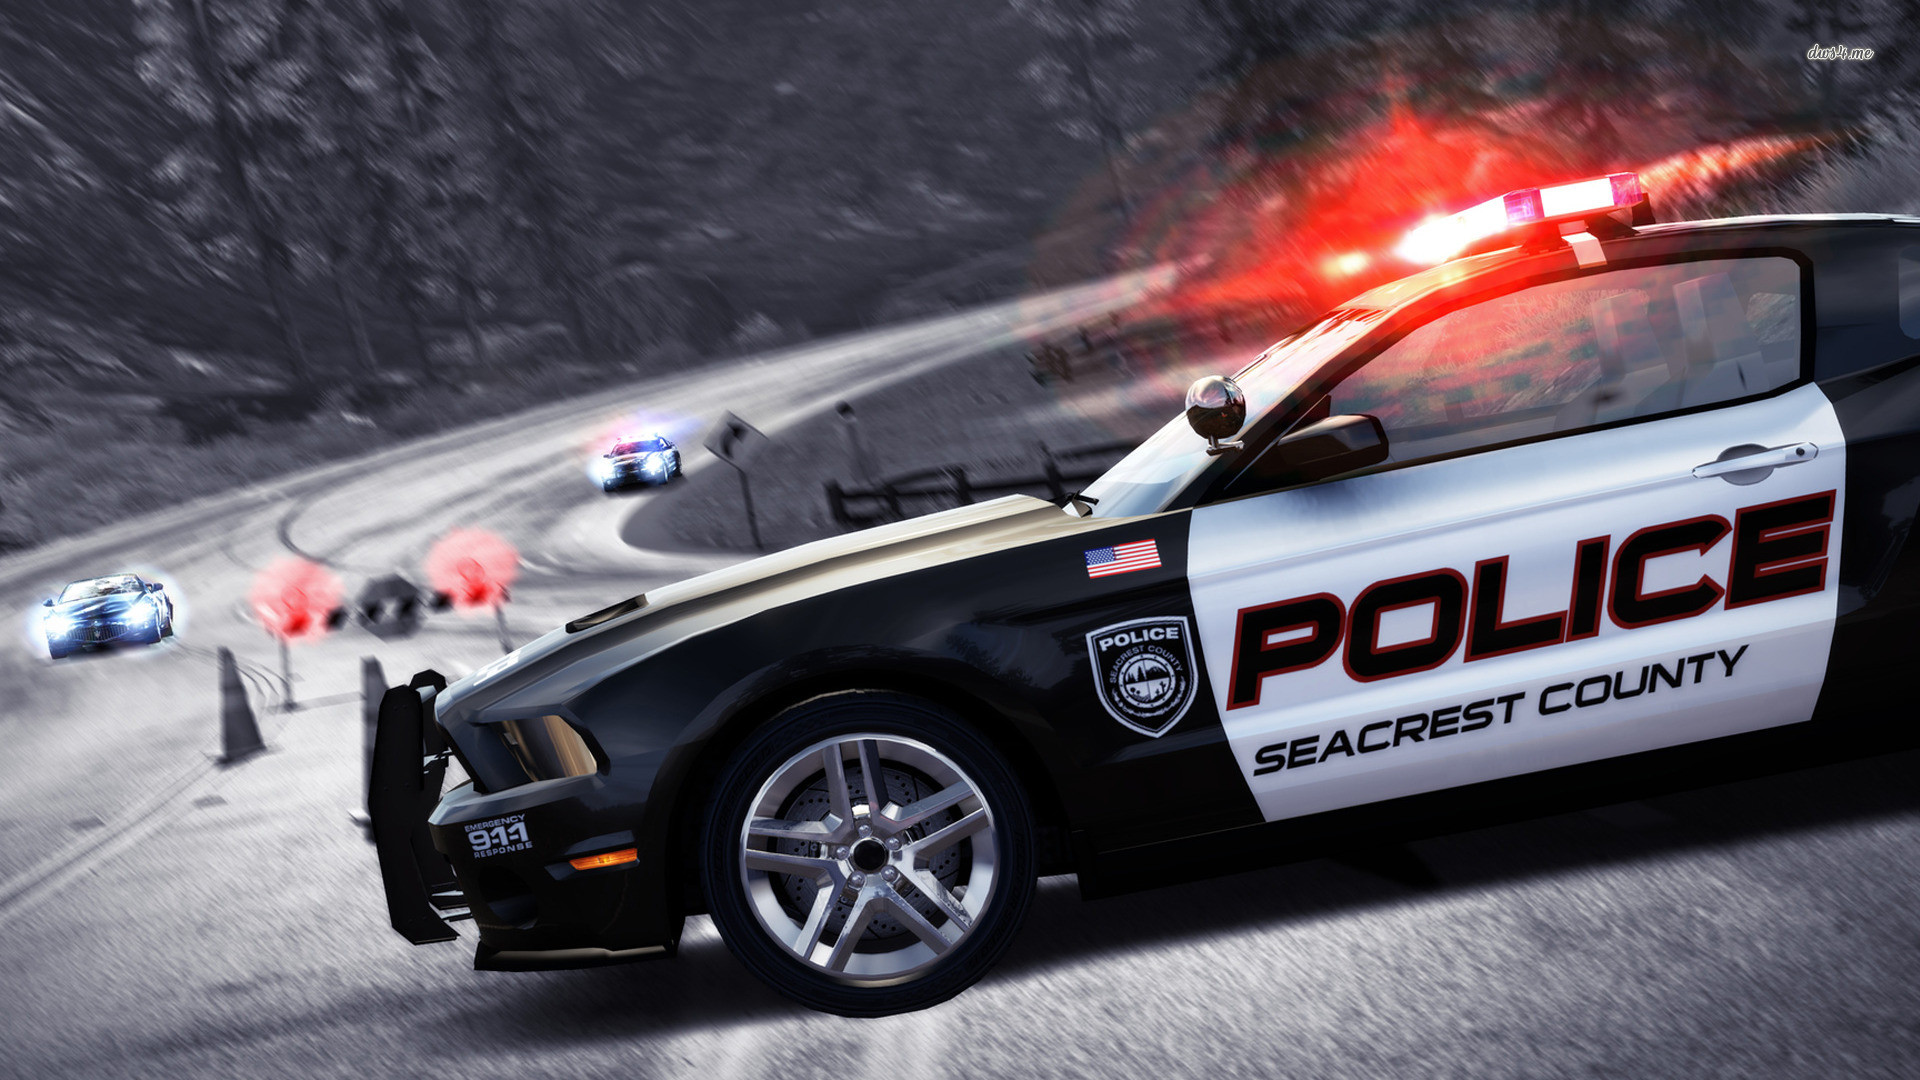 1920x1080 Police HD Wallpapers Backgrounds Wallpaper | HD Wallpapers | Pinterest | Hd  wallpaper, Wallpaper and Wallpaper backgrounds